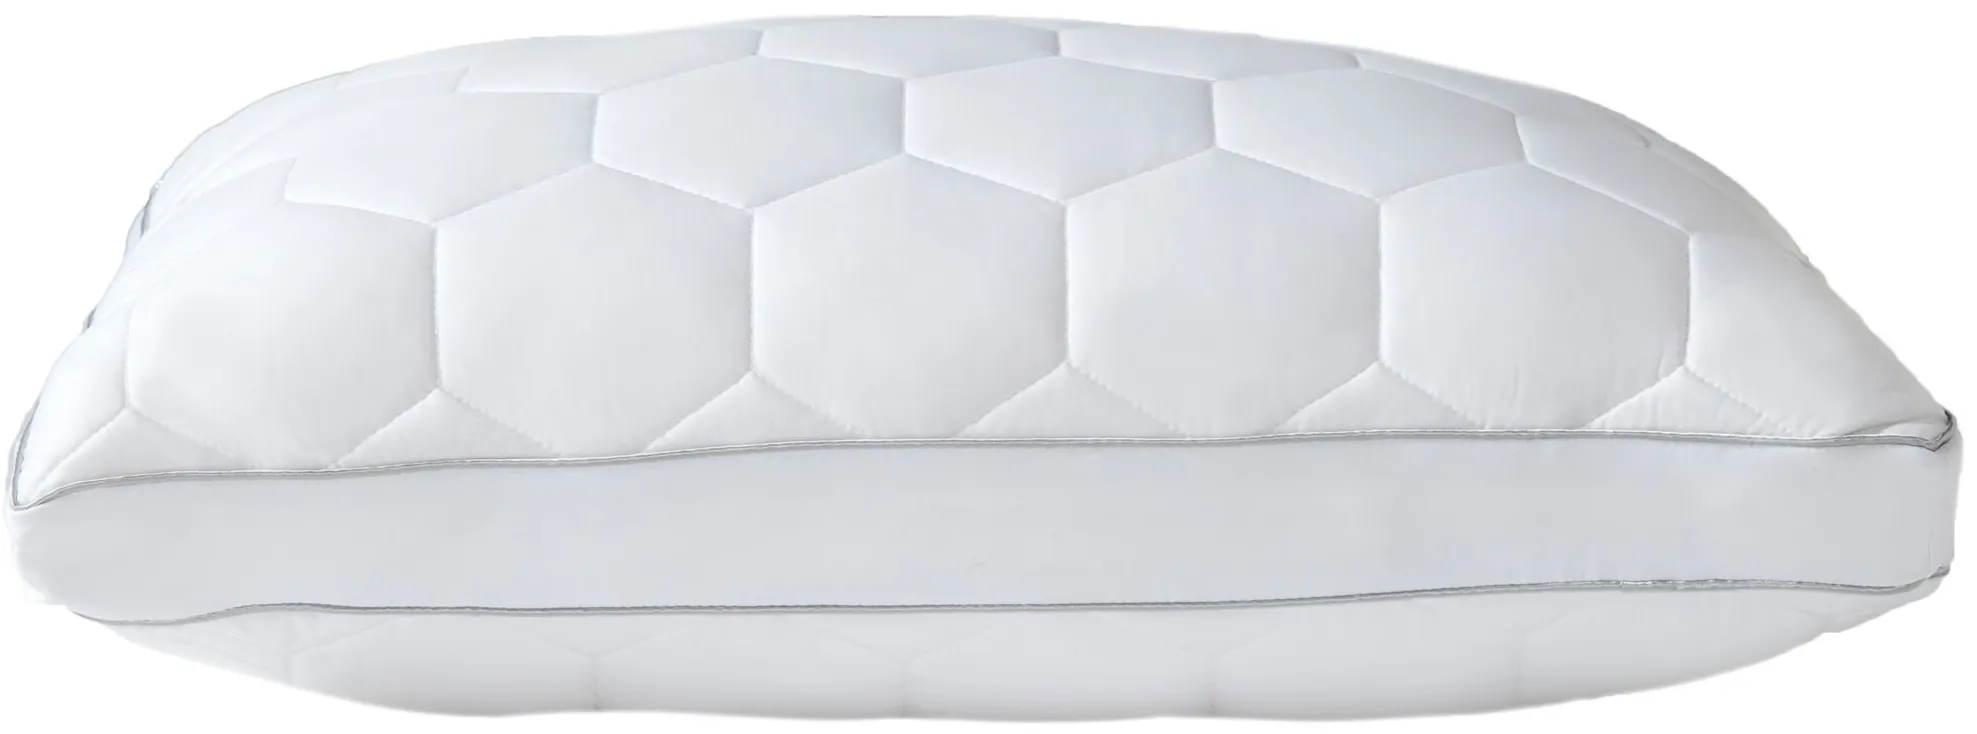 Elevated Performance by Sheex King Side Sleeper Pillow in White by Sheex Inc